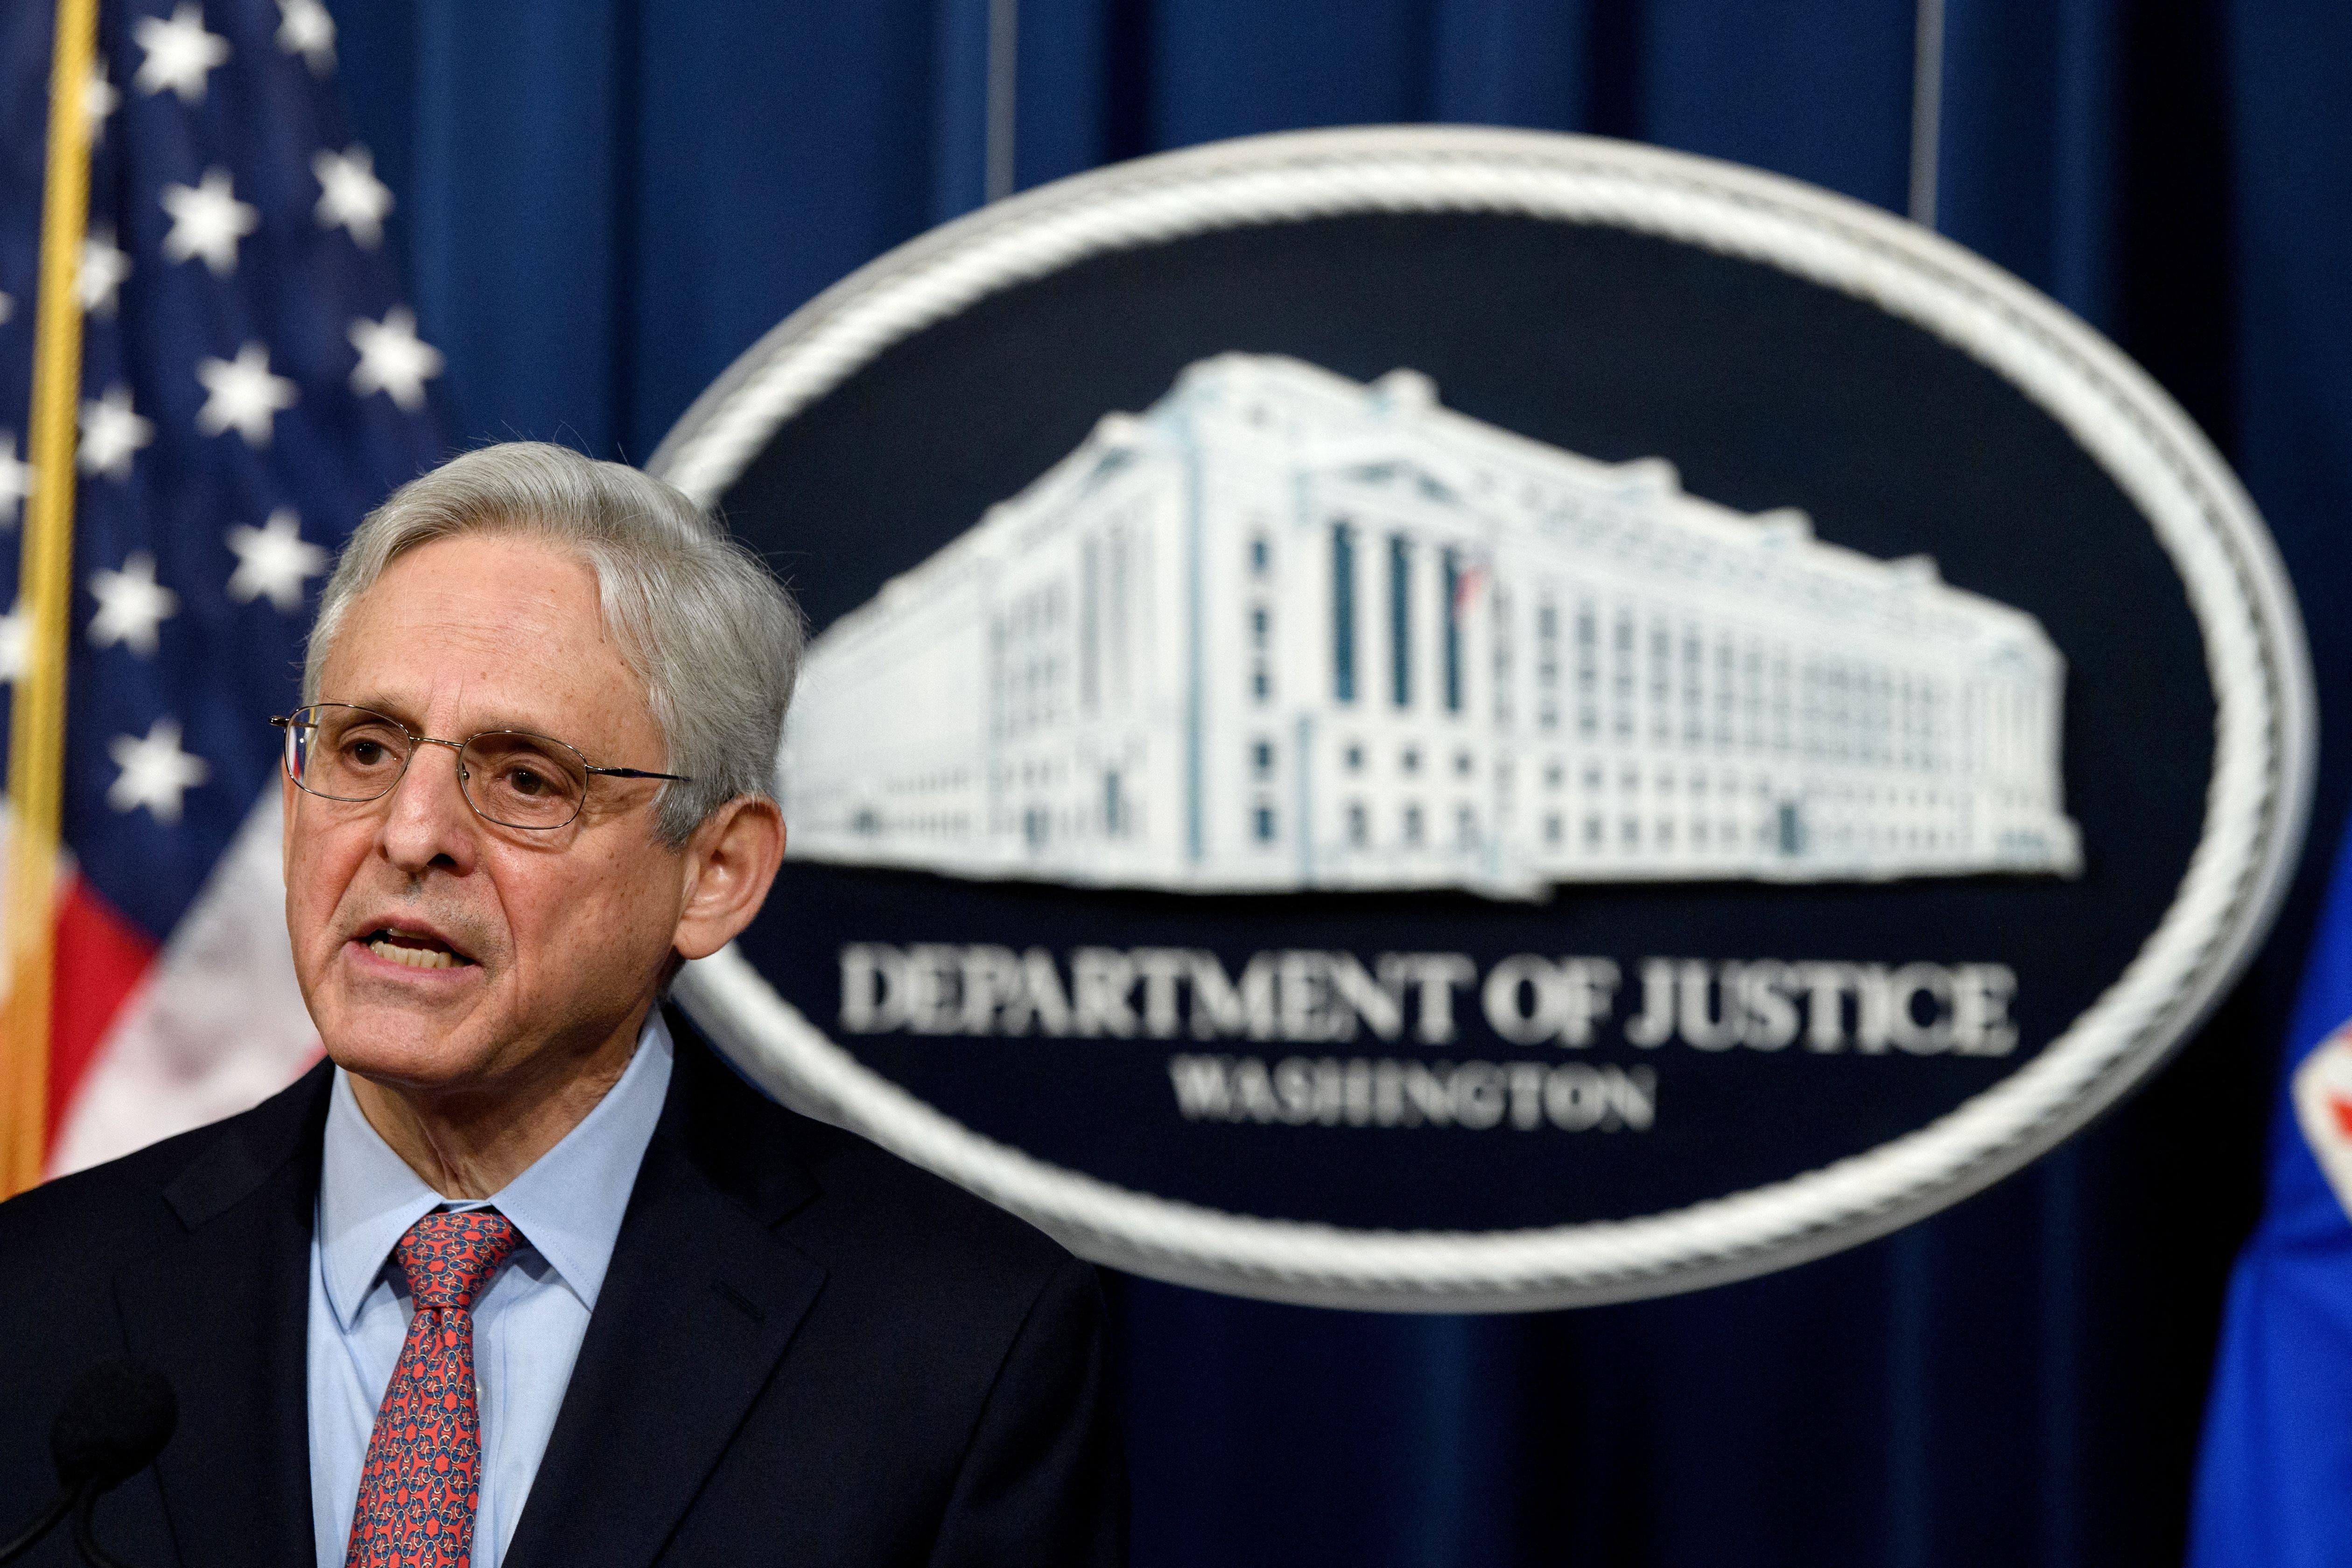 U.S. Attorney General Merrick Garland speaks to the press at the Justice Department in Washington, D.C. on February 22, 2022.